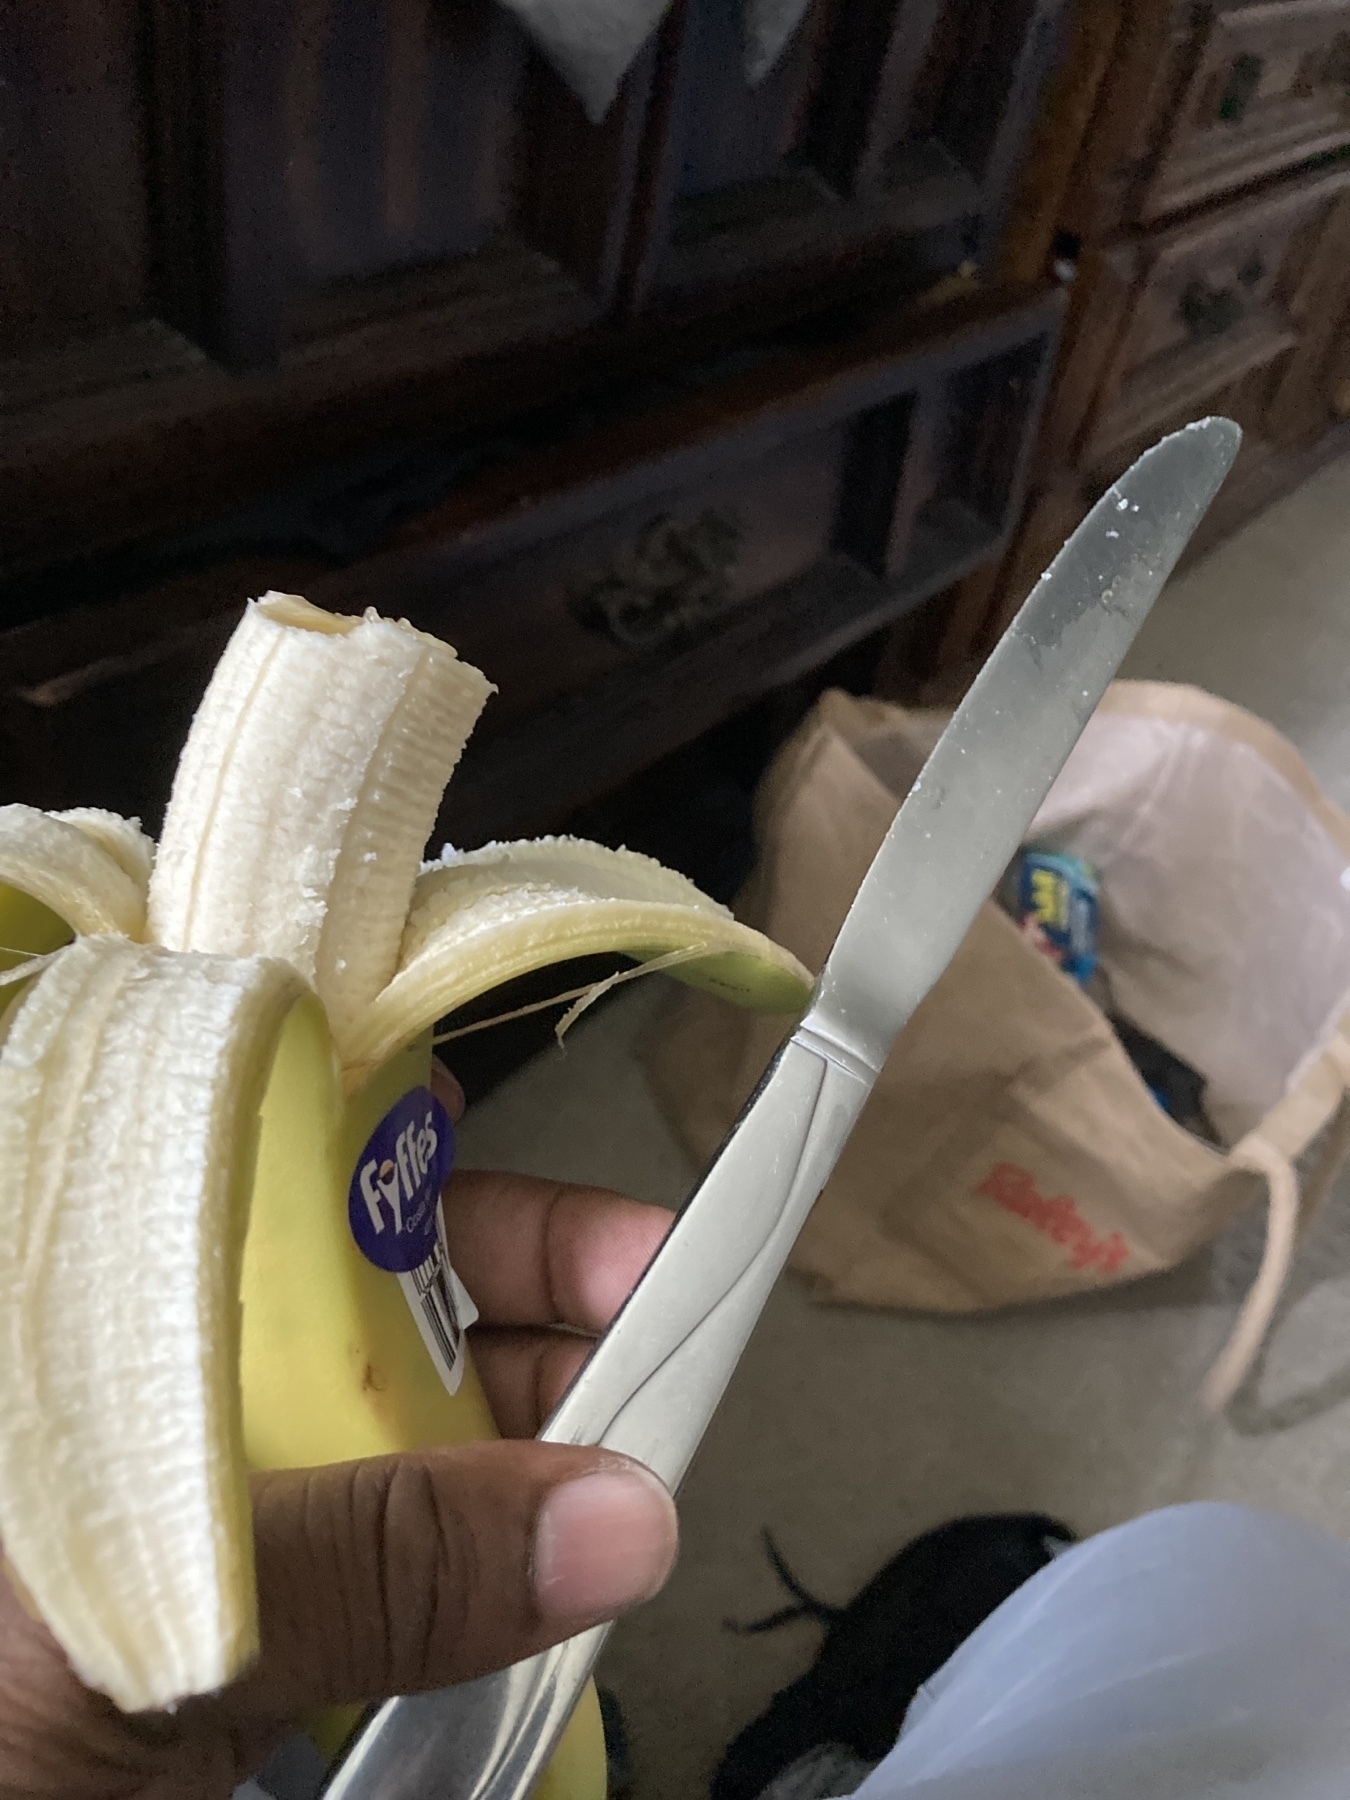 banana and butter knife